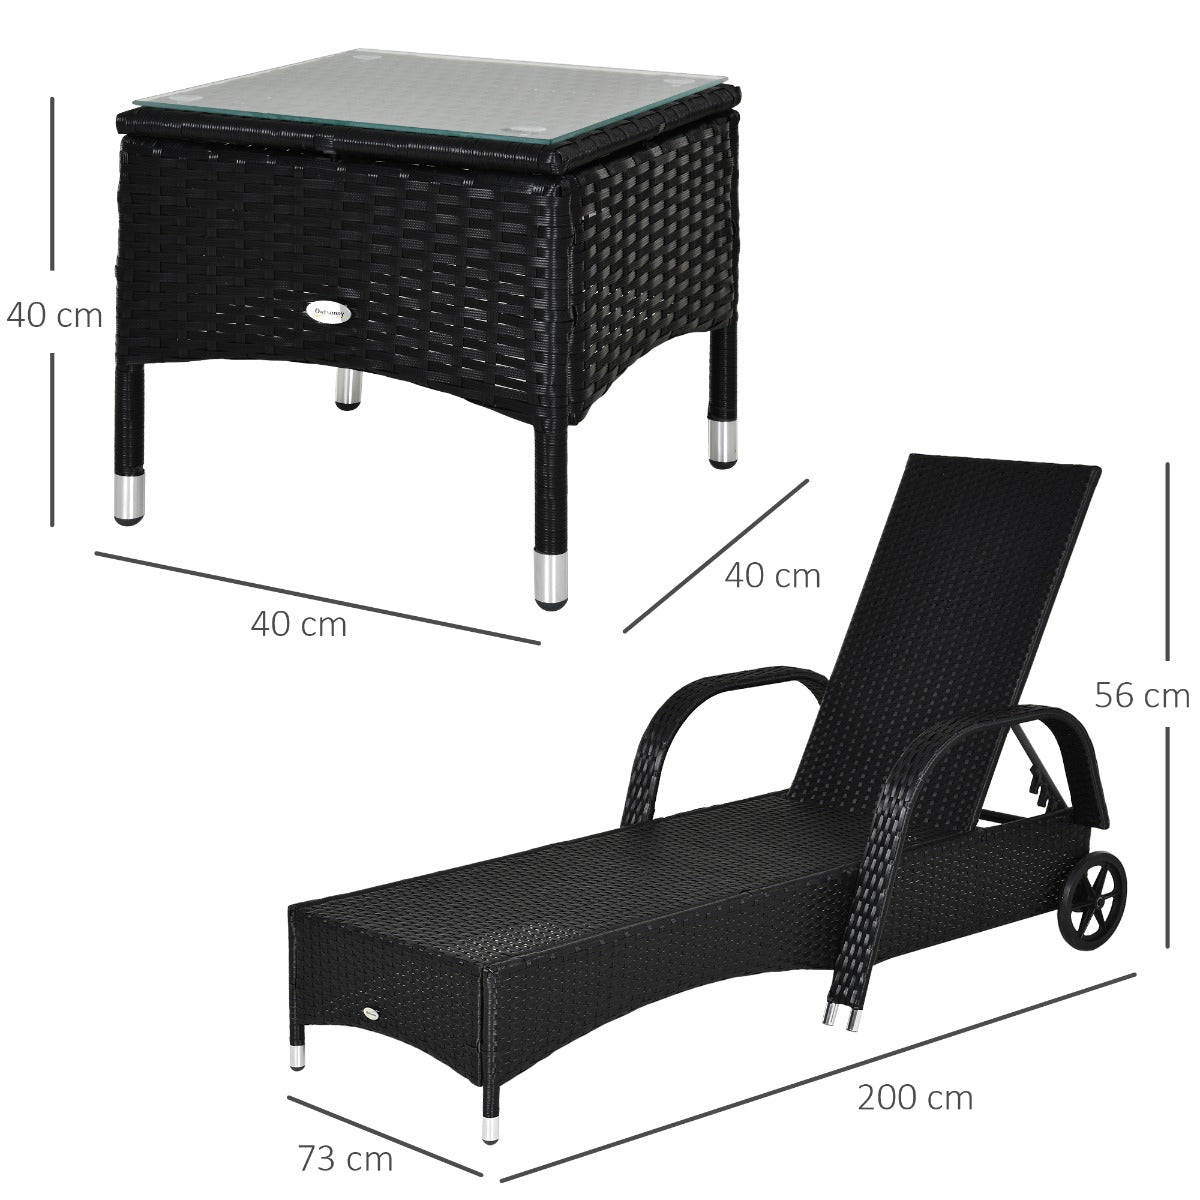 Outsunny 2 Seater Rattan Sun Lounger Set with Side Table Black